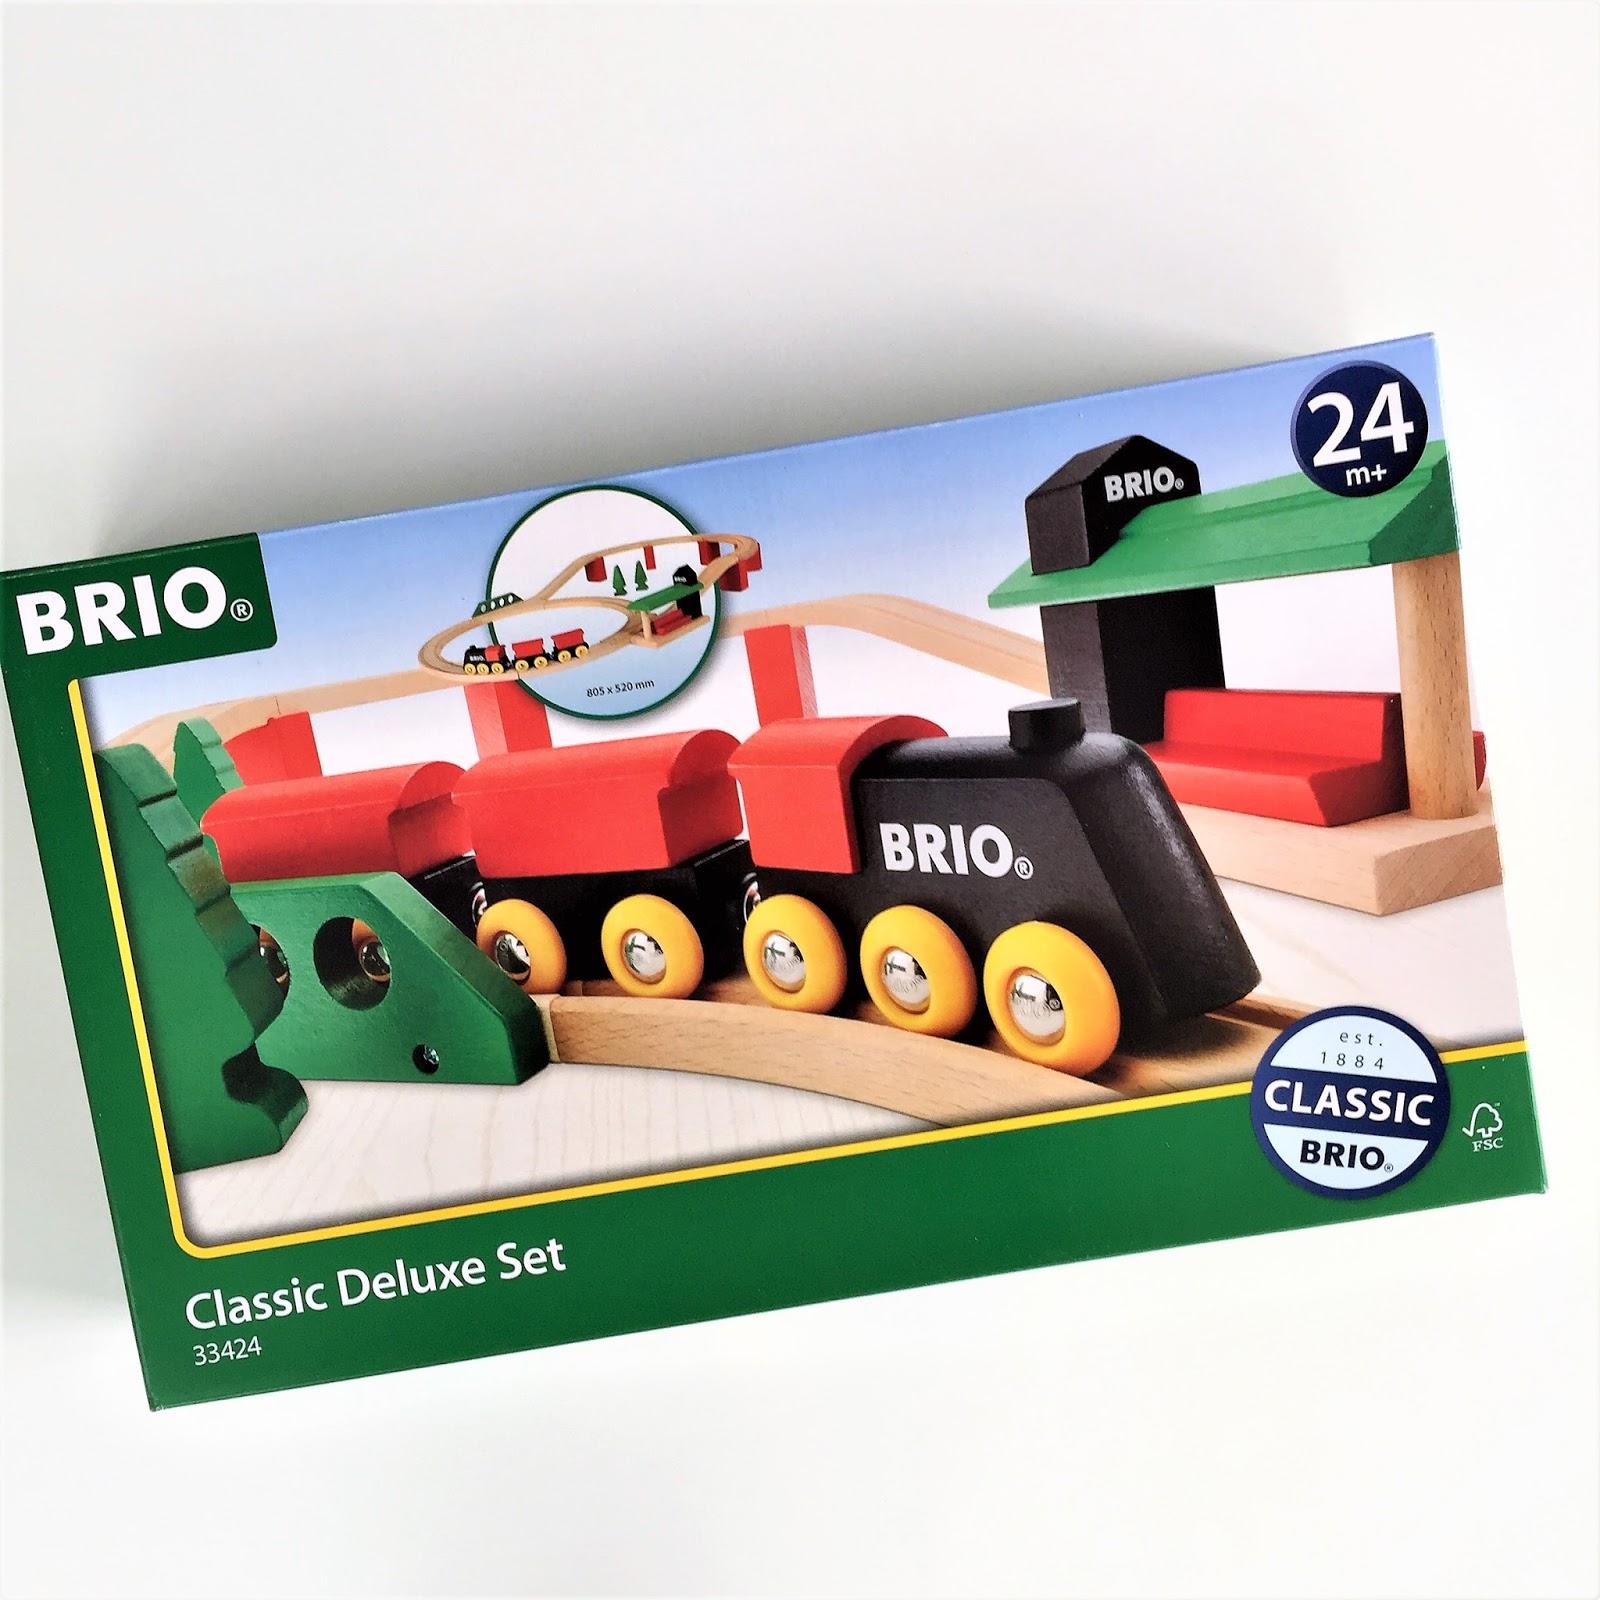 PRODUCT REVIEW: BRIO CLASSIC DELUXE TRAIN SET 33424 FROM 